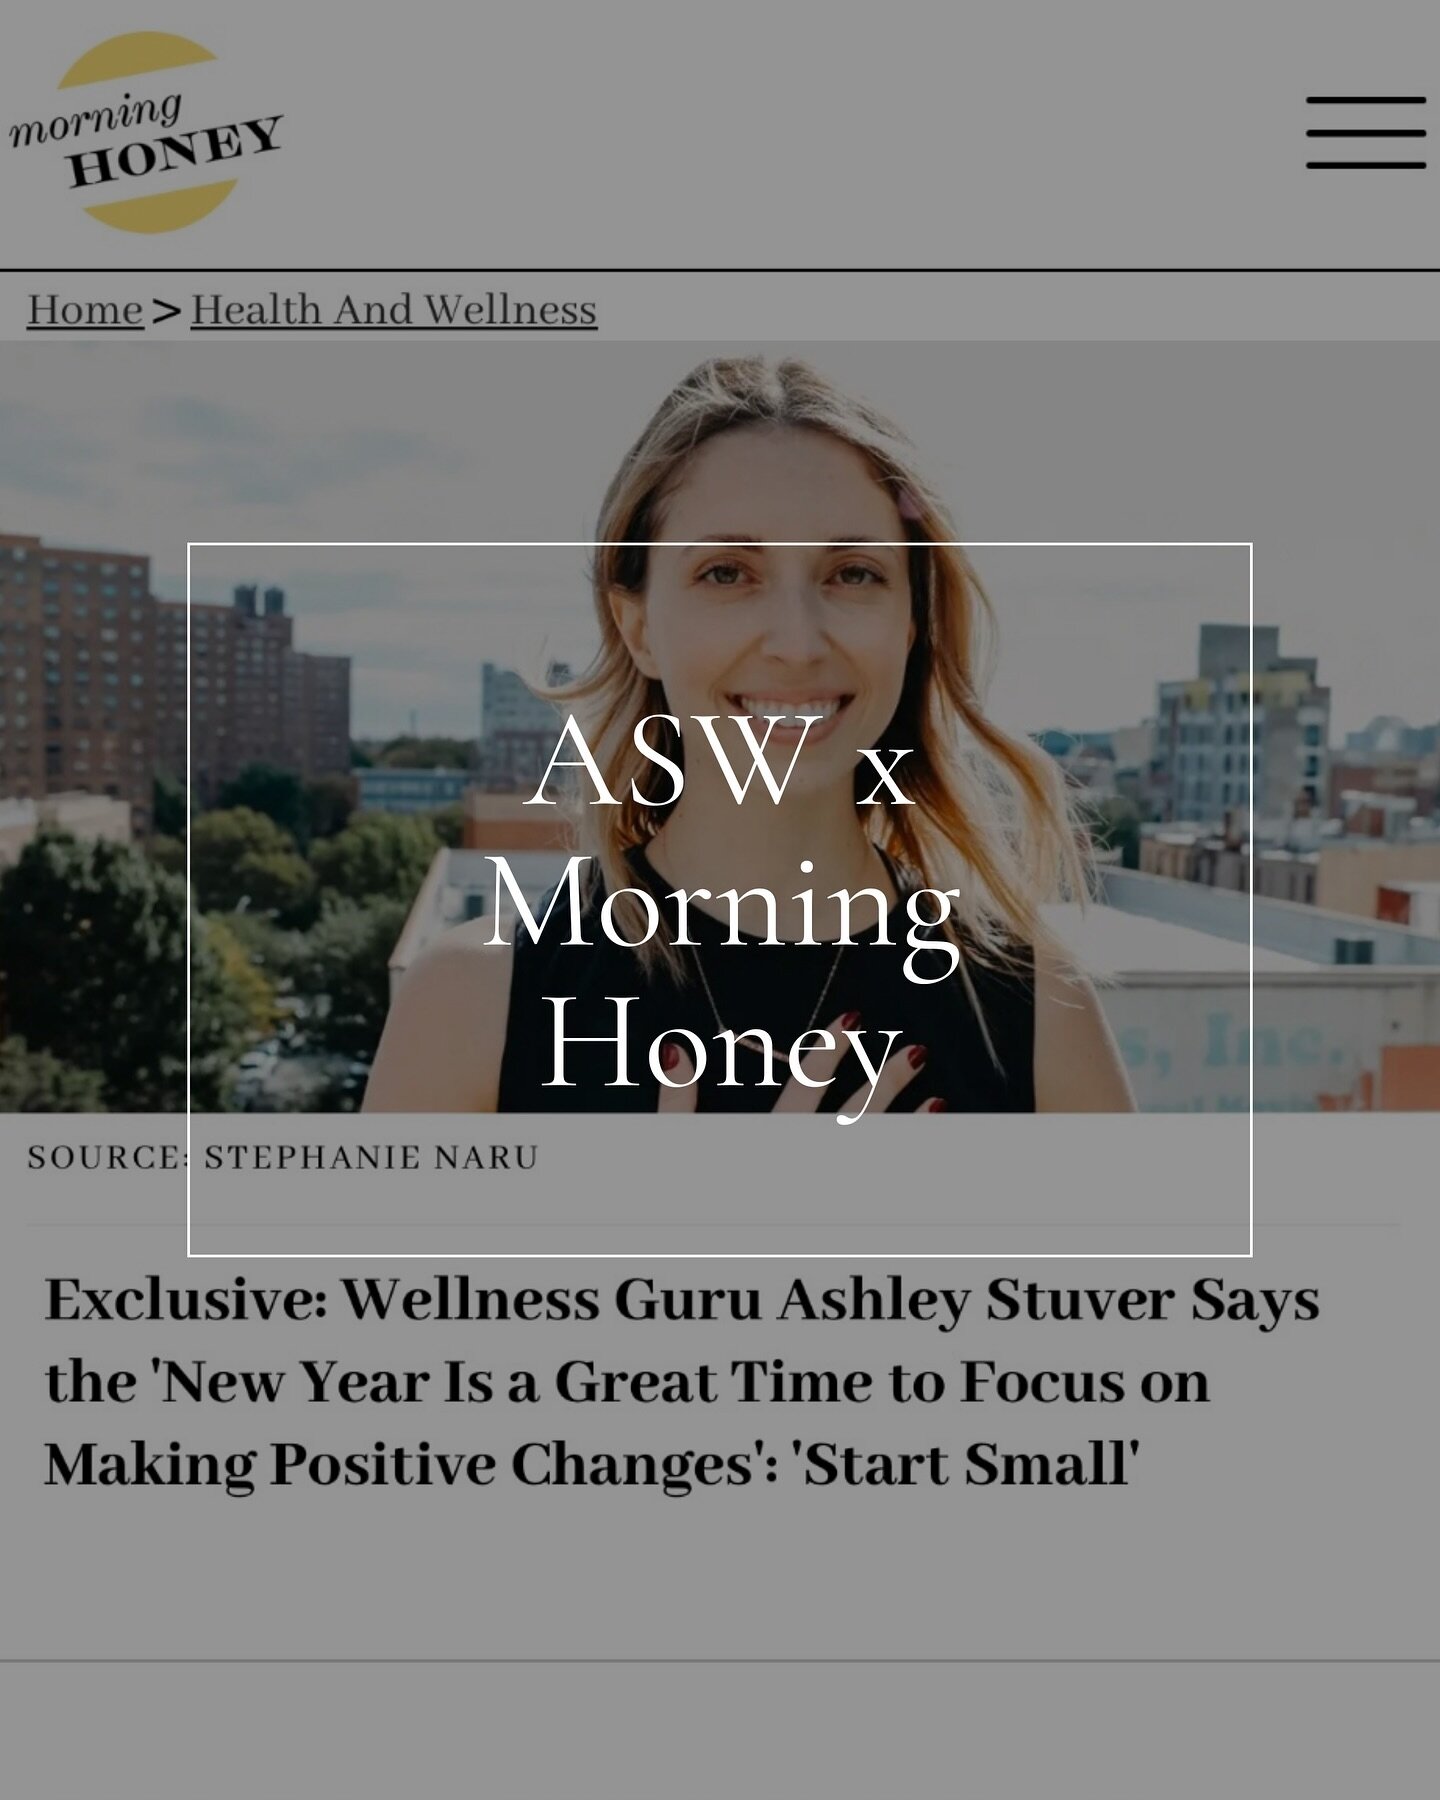 I got to chat with Morning Honey about all things habits + the new year.

My number one tip? Start small!

&ldquo;Little by little is better than nothing at all, and when we have these big lofty goals and try to do everything at once, we will likely 